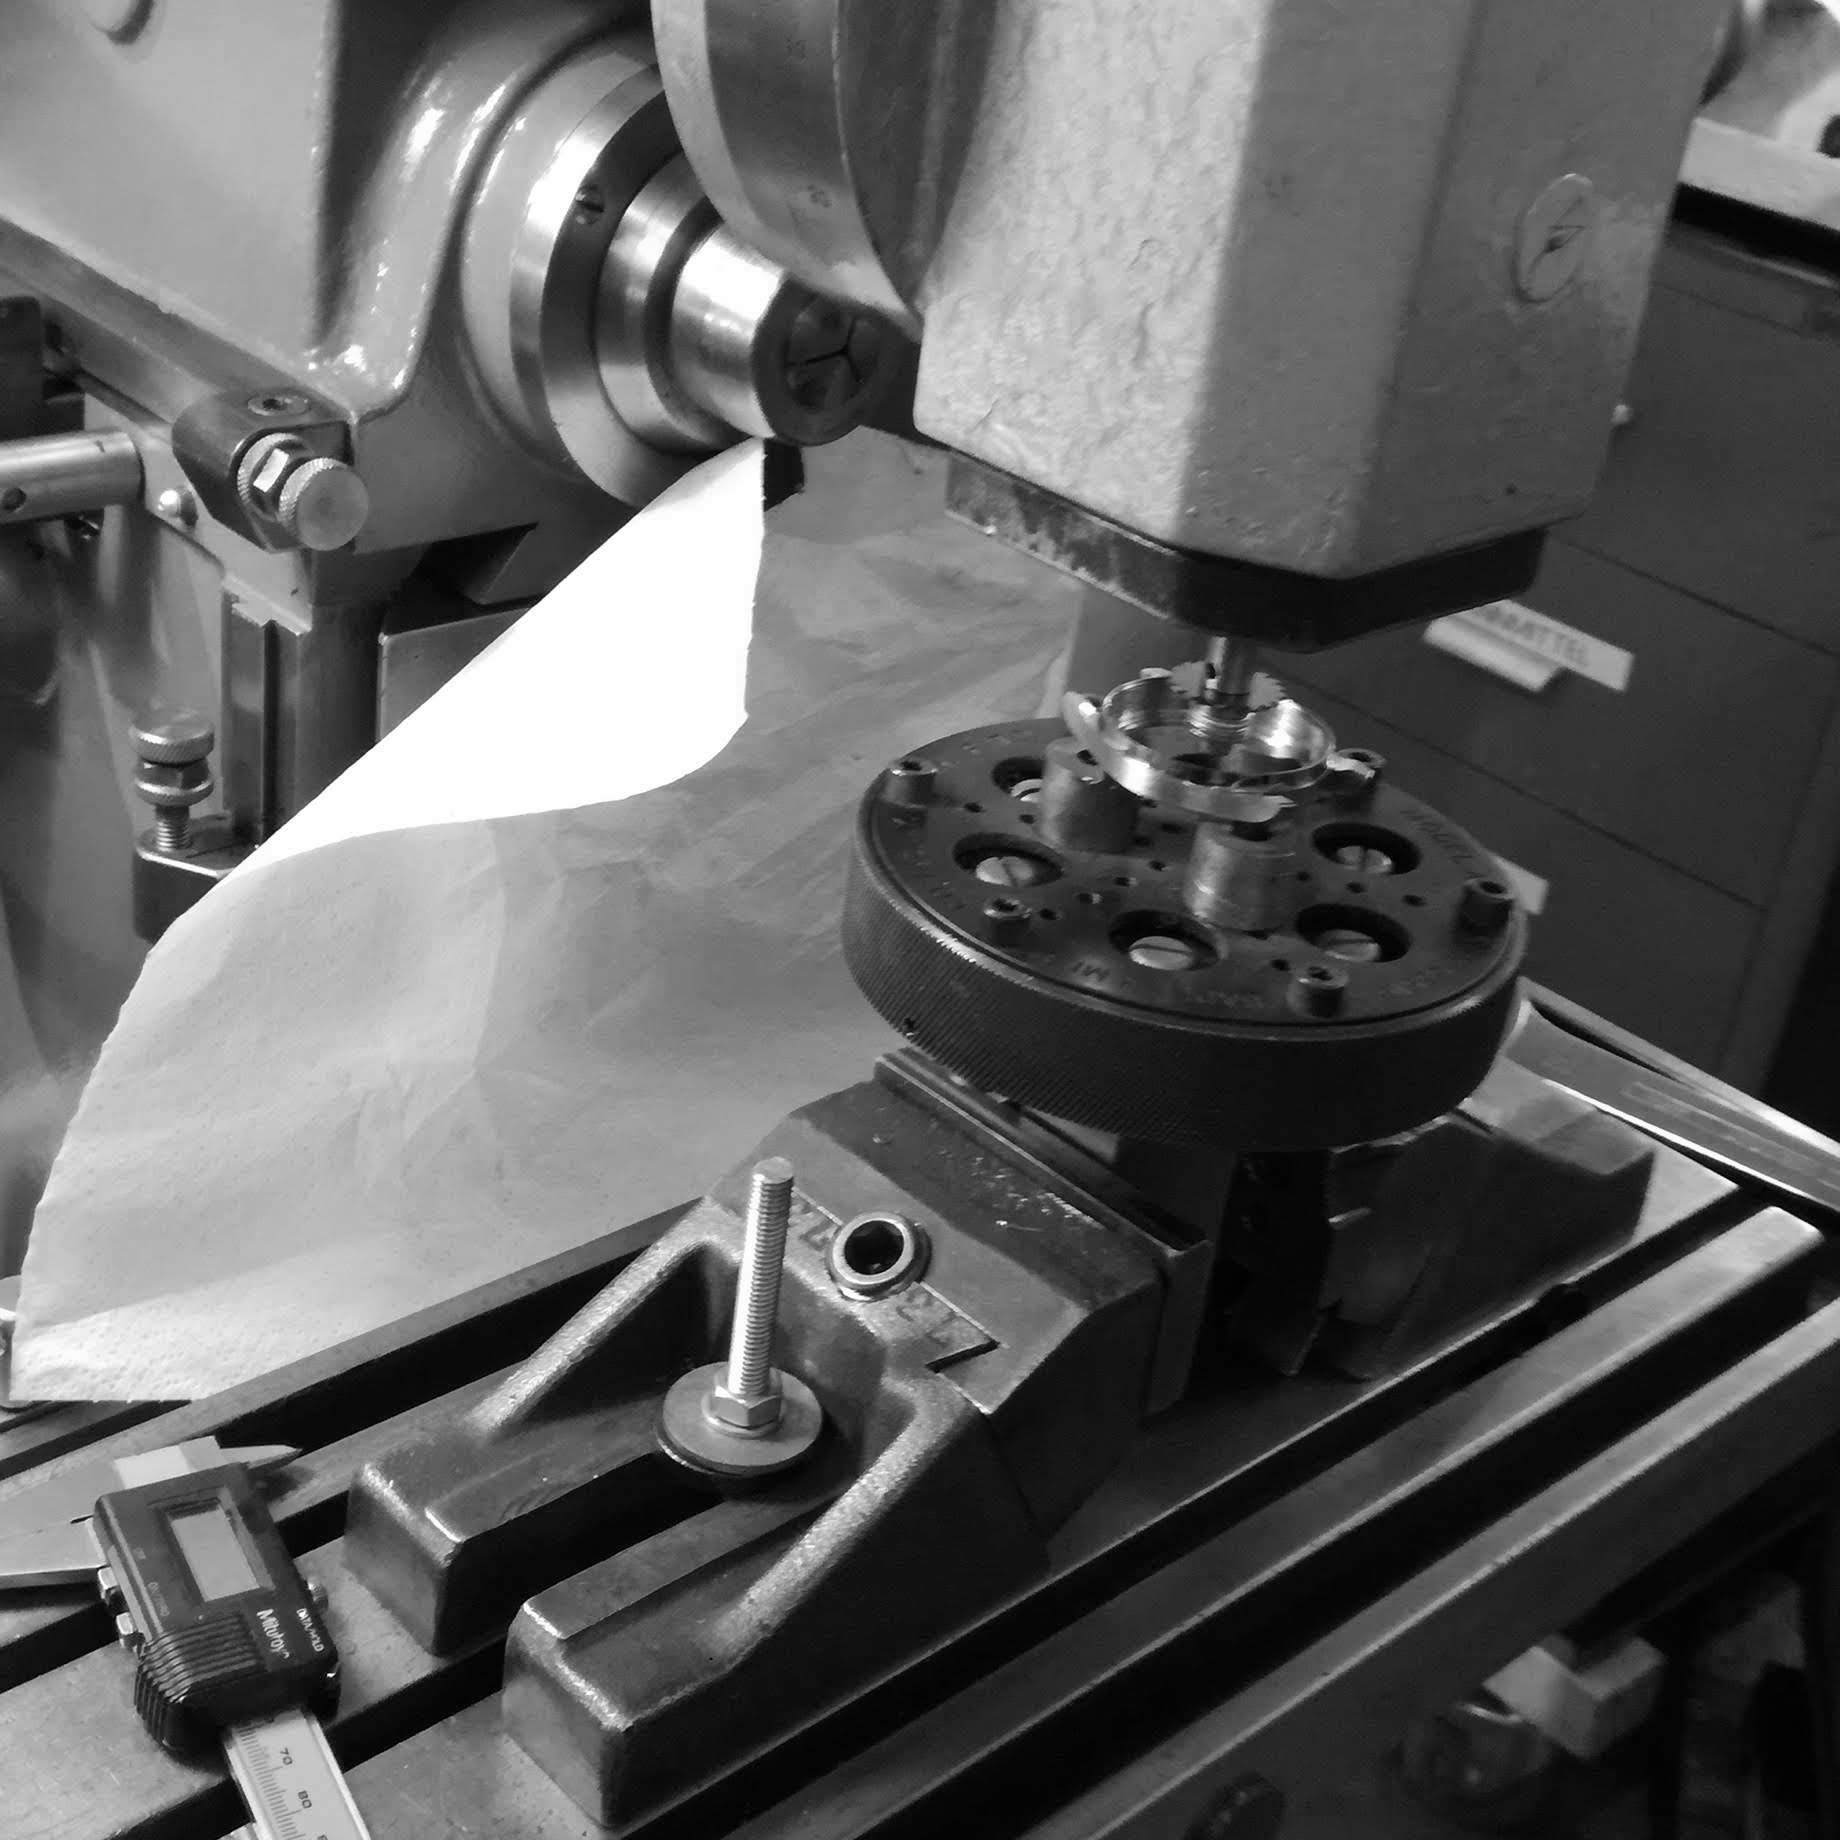 I mill various recesses in the case. since the case is so thin, it is of utmost importance that tolerances are within 1/100th of a milimeter.